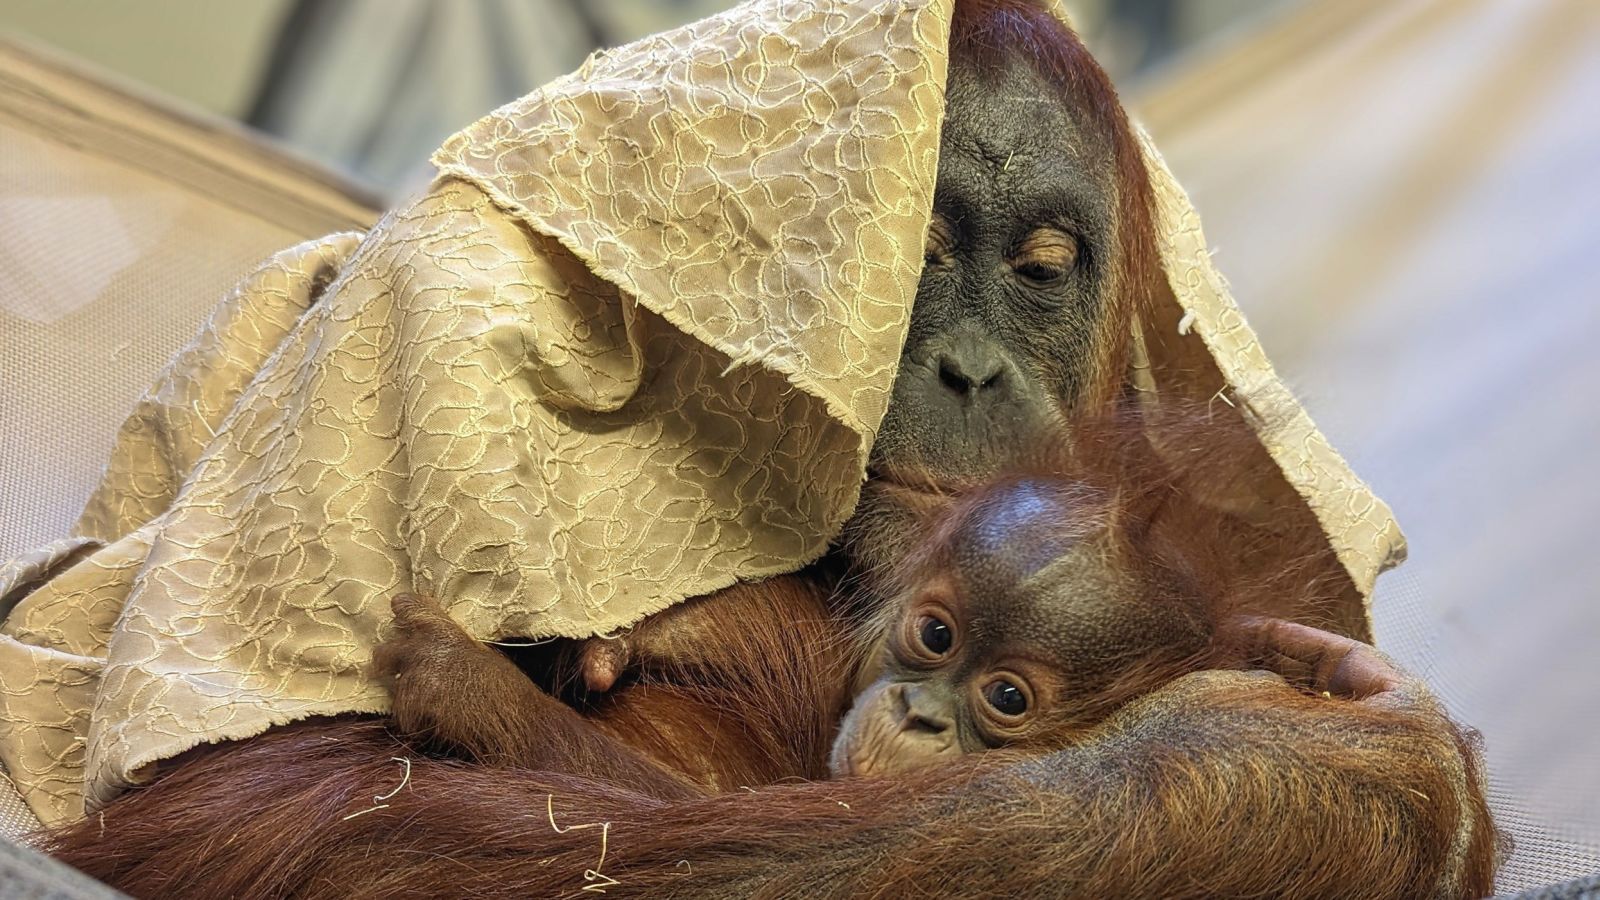 At the zoo, they were not sure who the father of the baby orangutan was.  A celebrity has revealed the results of a paternity test